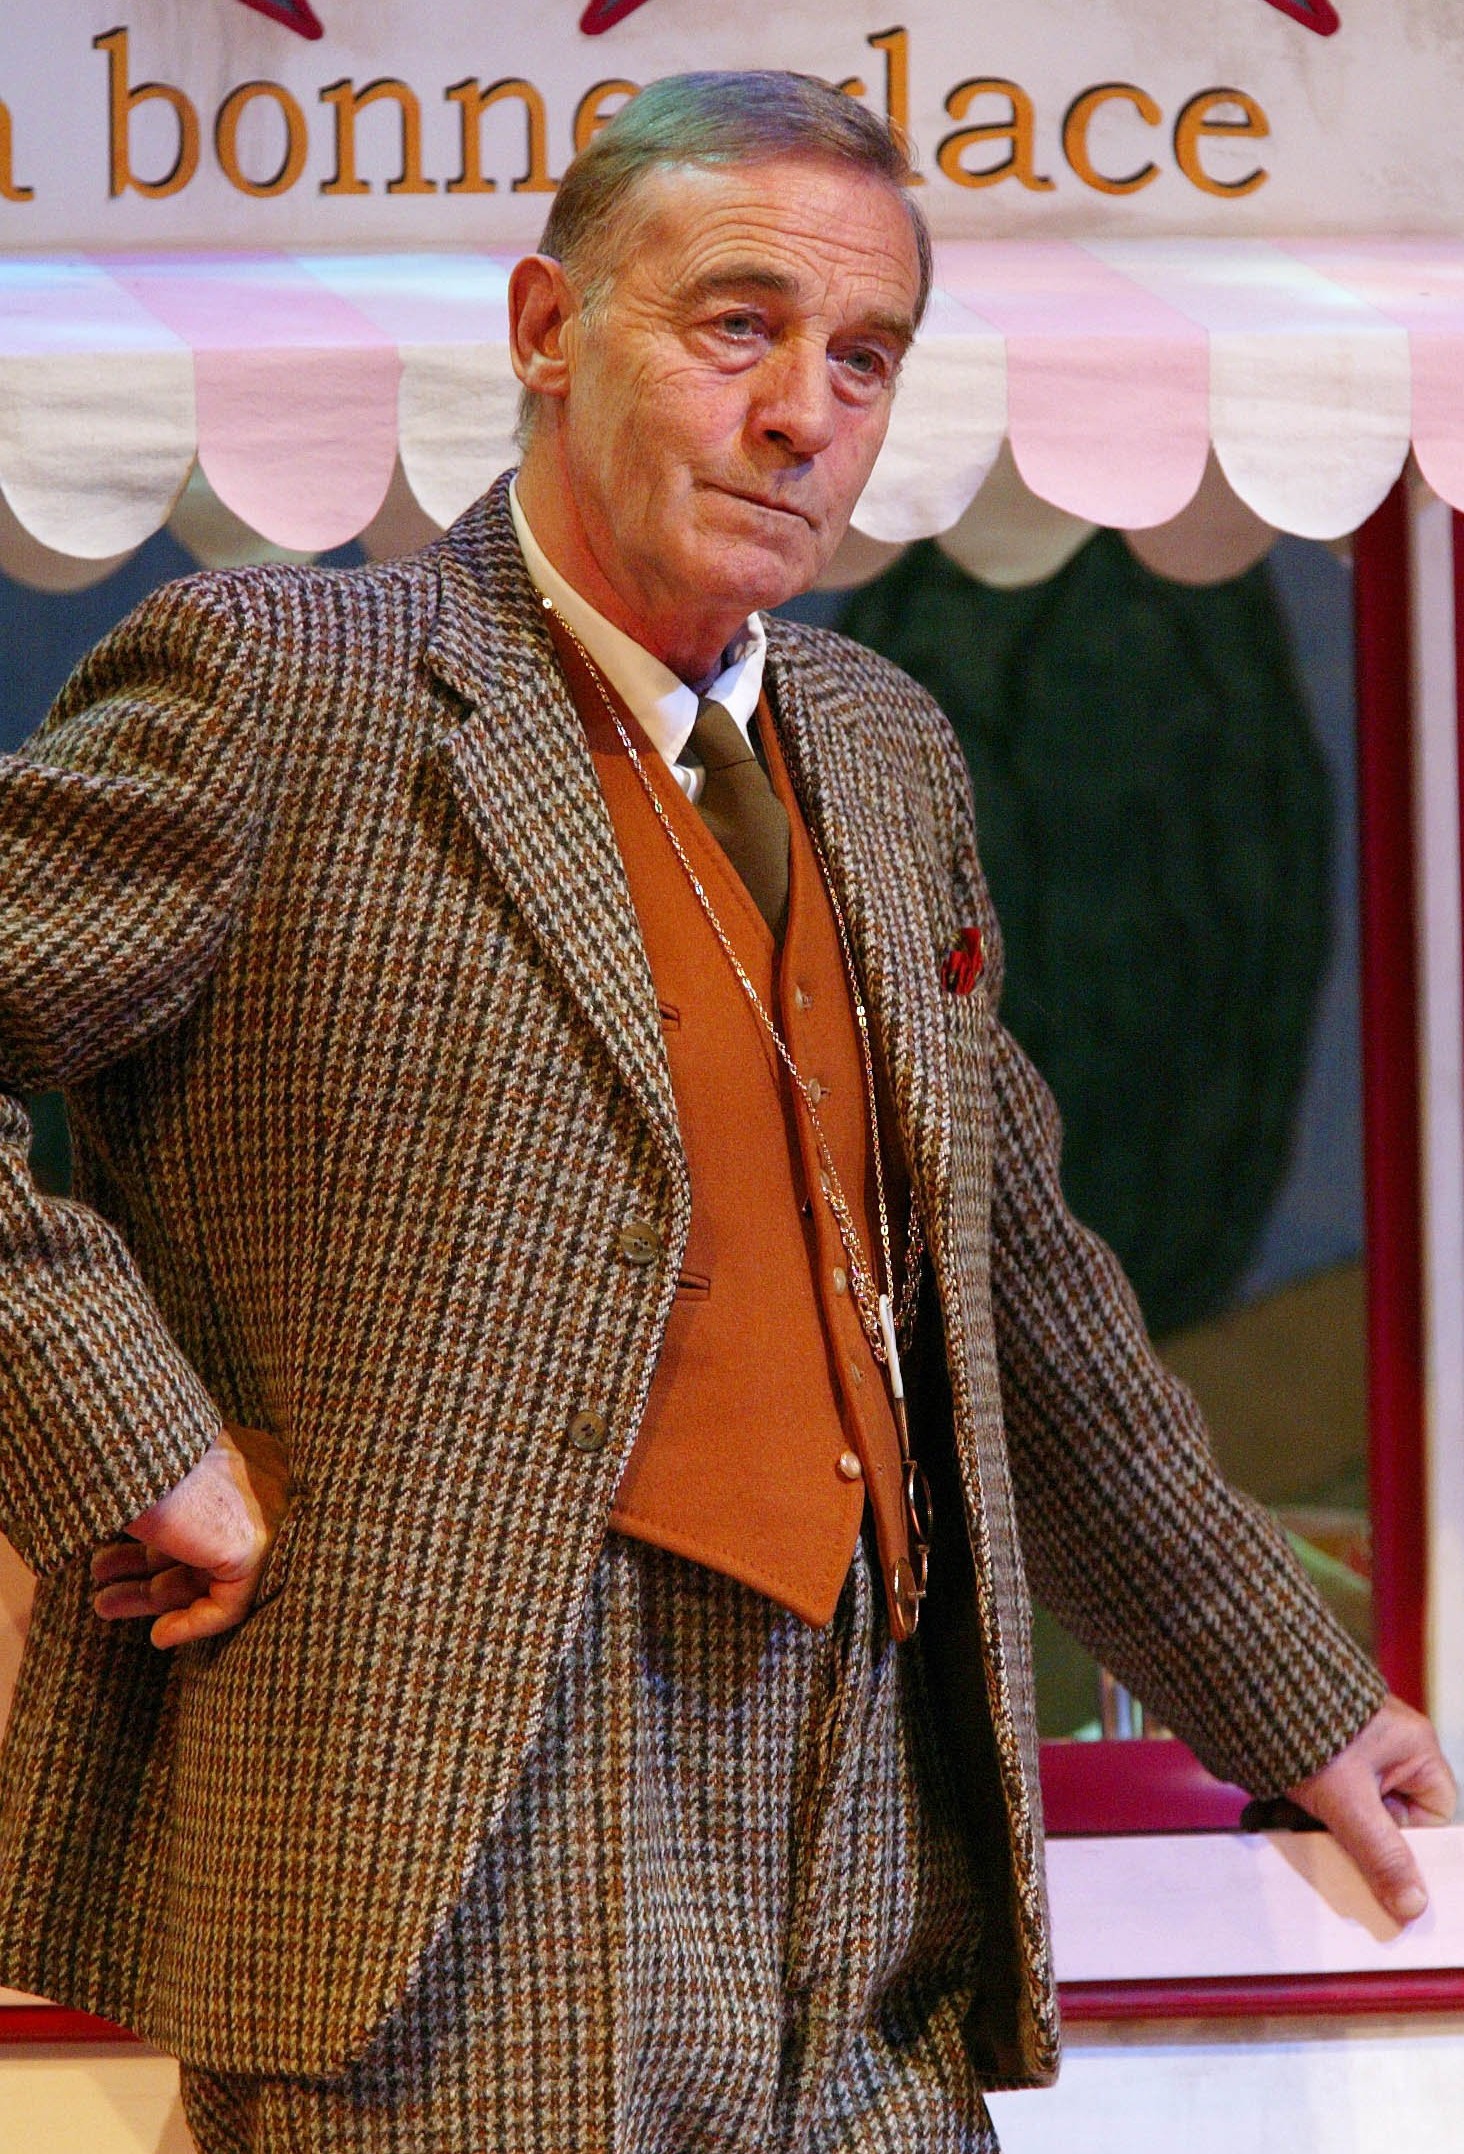 Michael Jayston died aged 88 after a 'short illness'